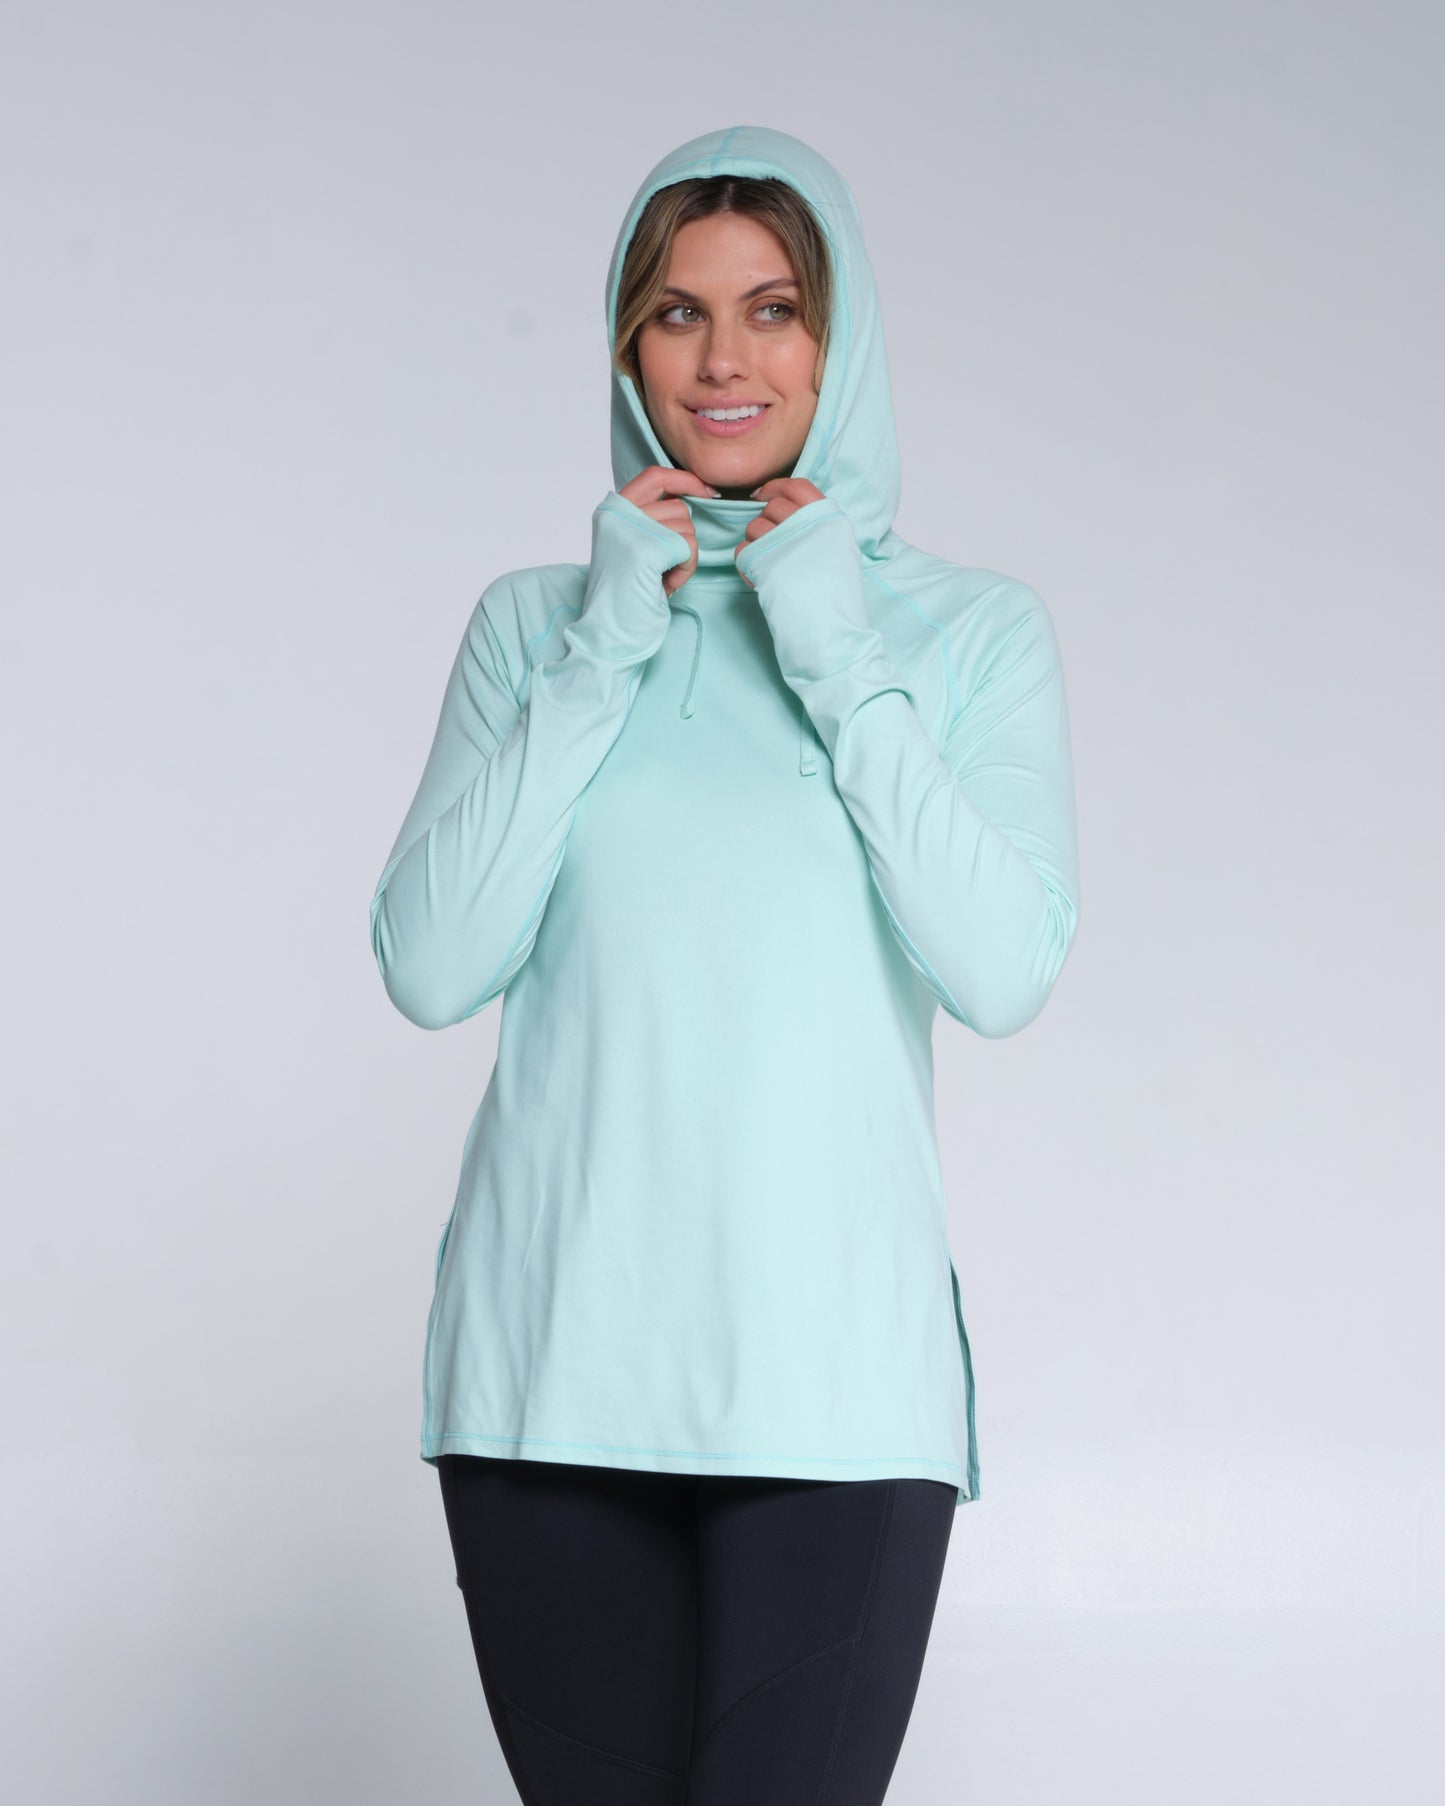 On body front of the Thrill Seekers Sea Foam Hooded Sunshirt